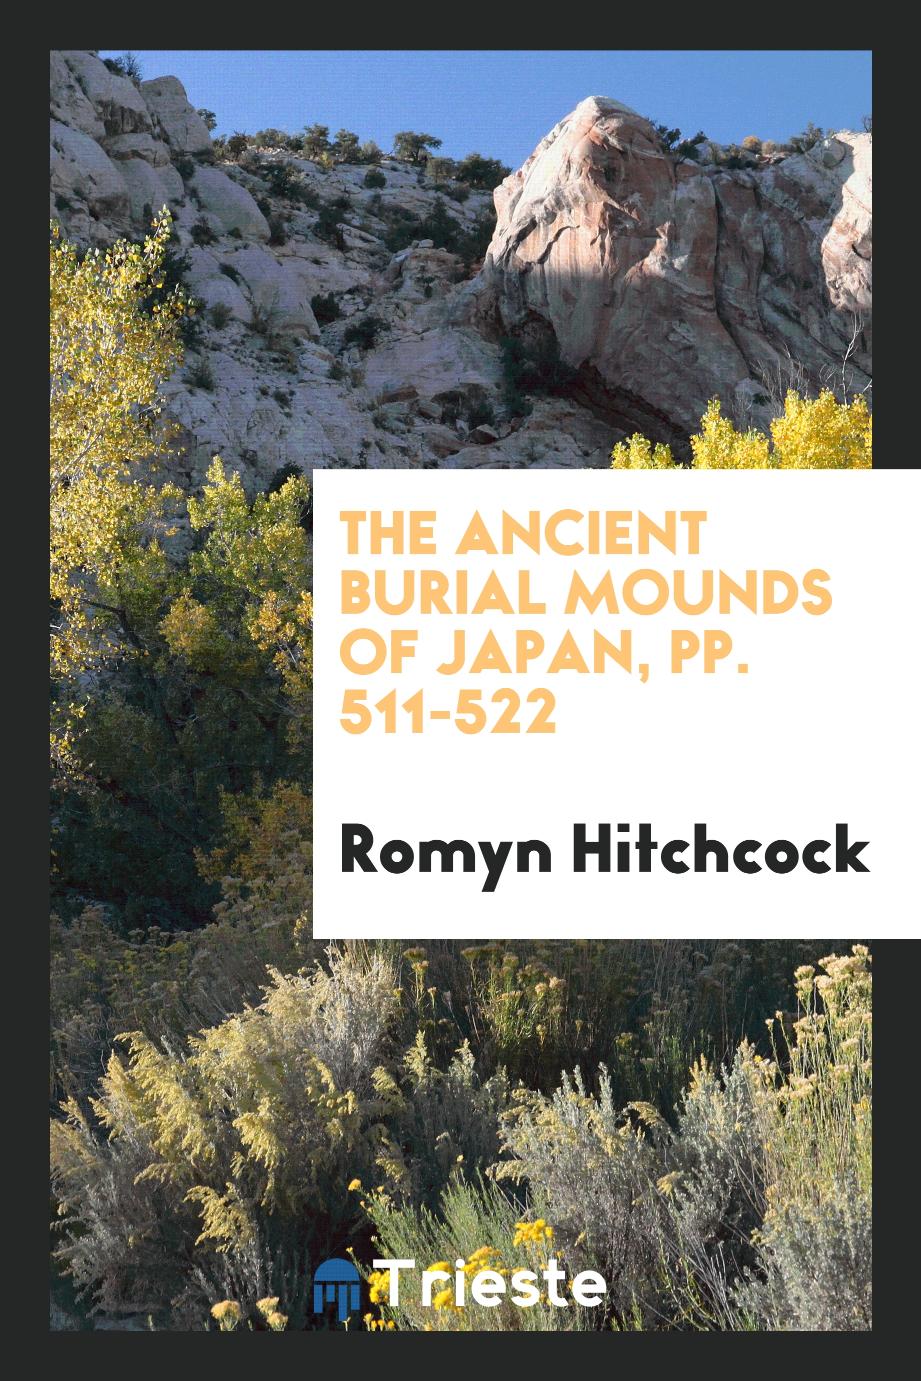 The Ancient Burial Mounds of Japan, pp. 511-522